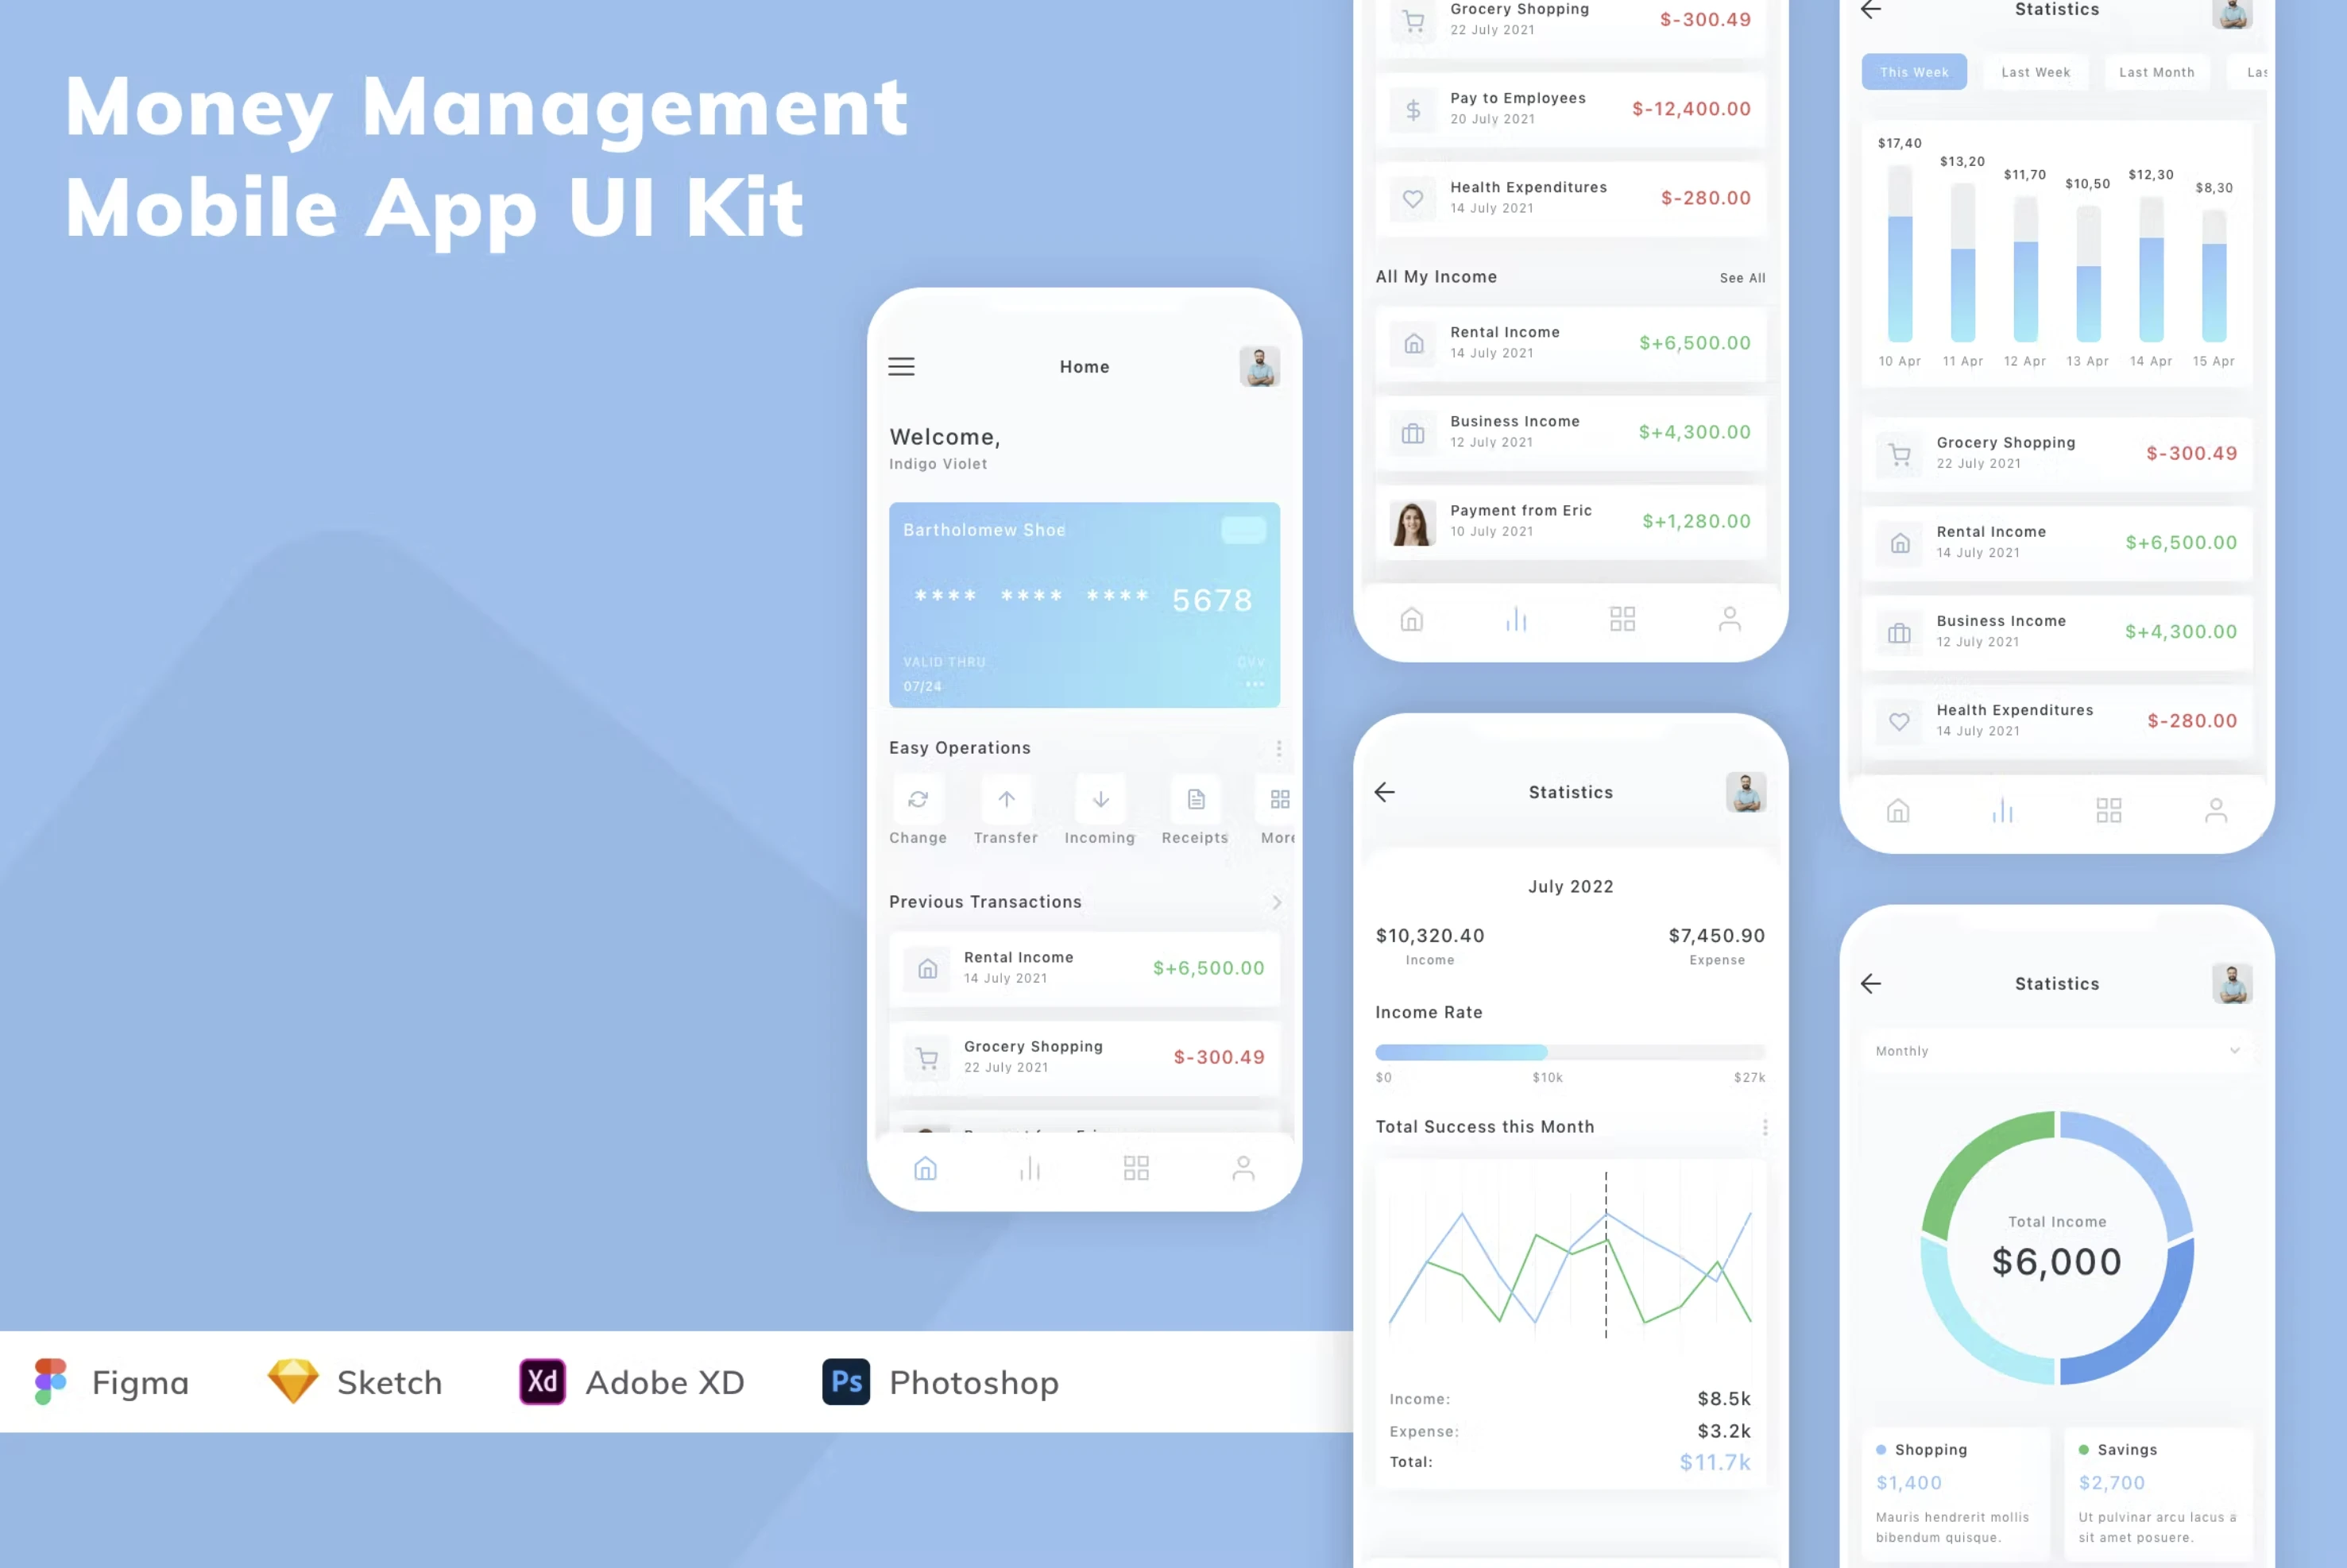 Figma UI kit - Money Management Mobile App (Community) for Figma and Adobe XD